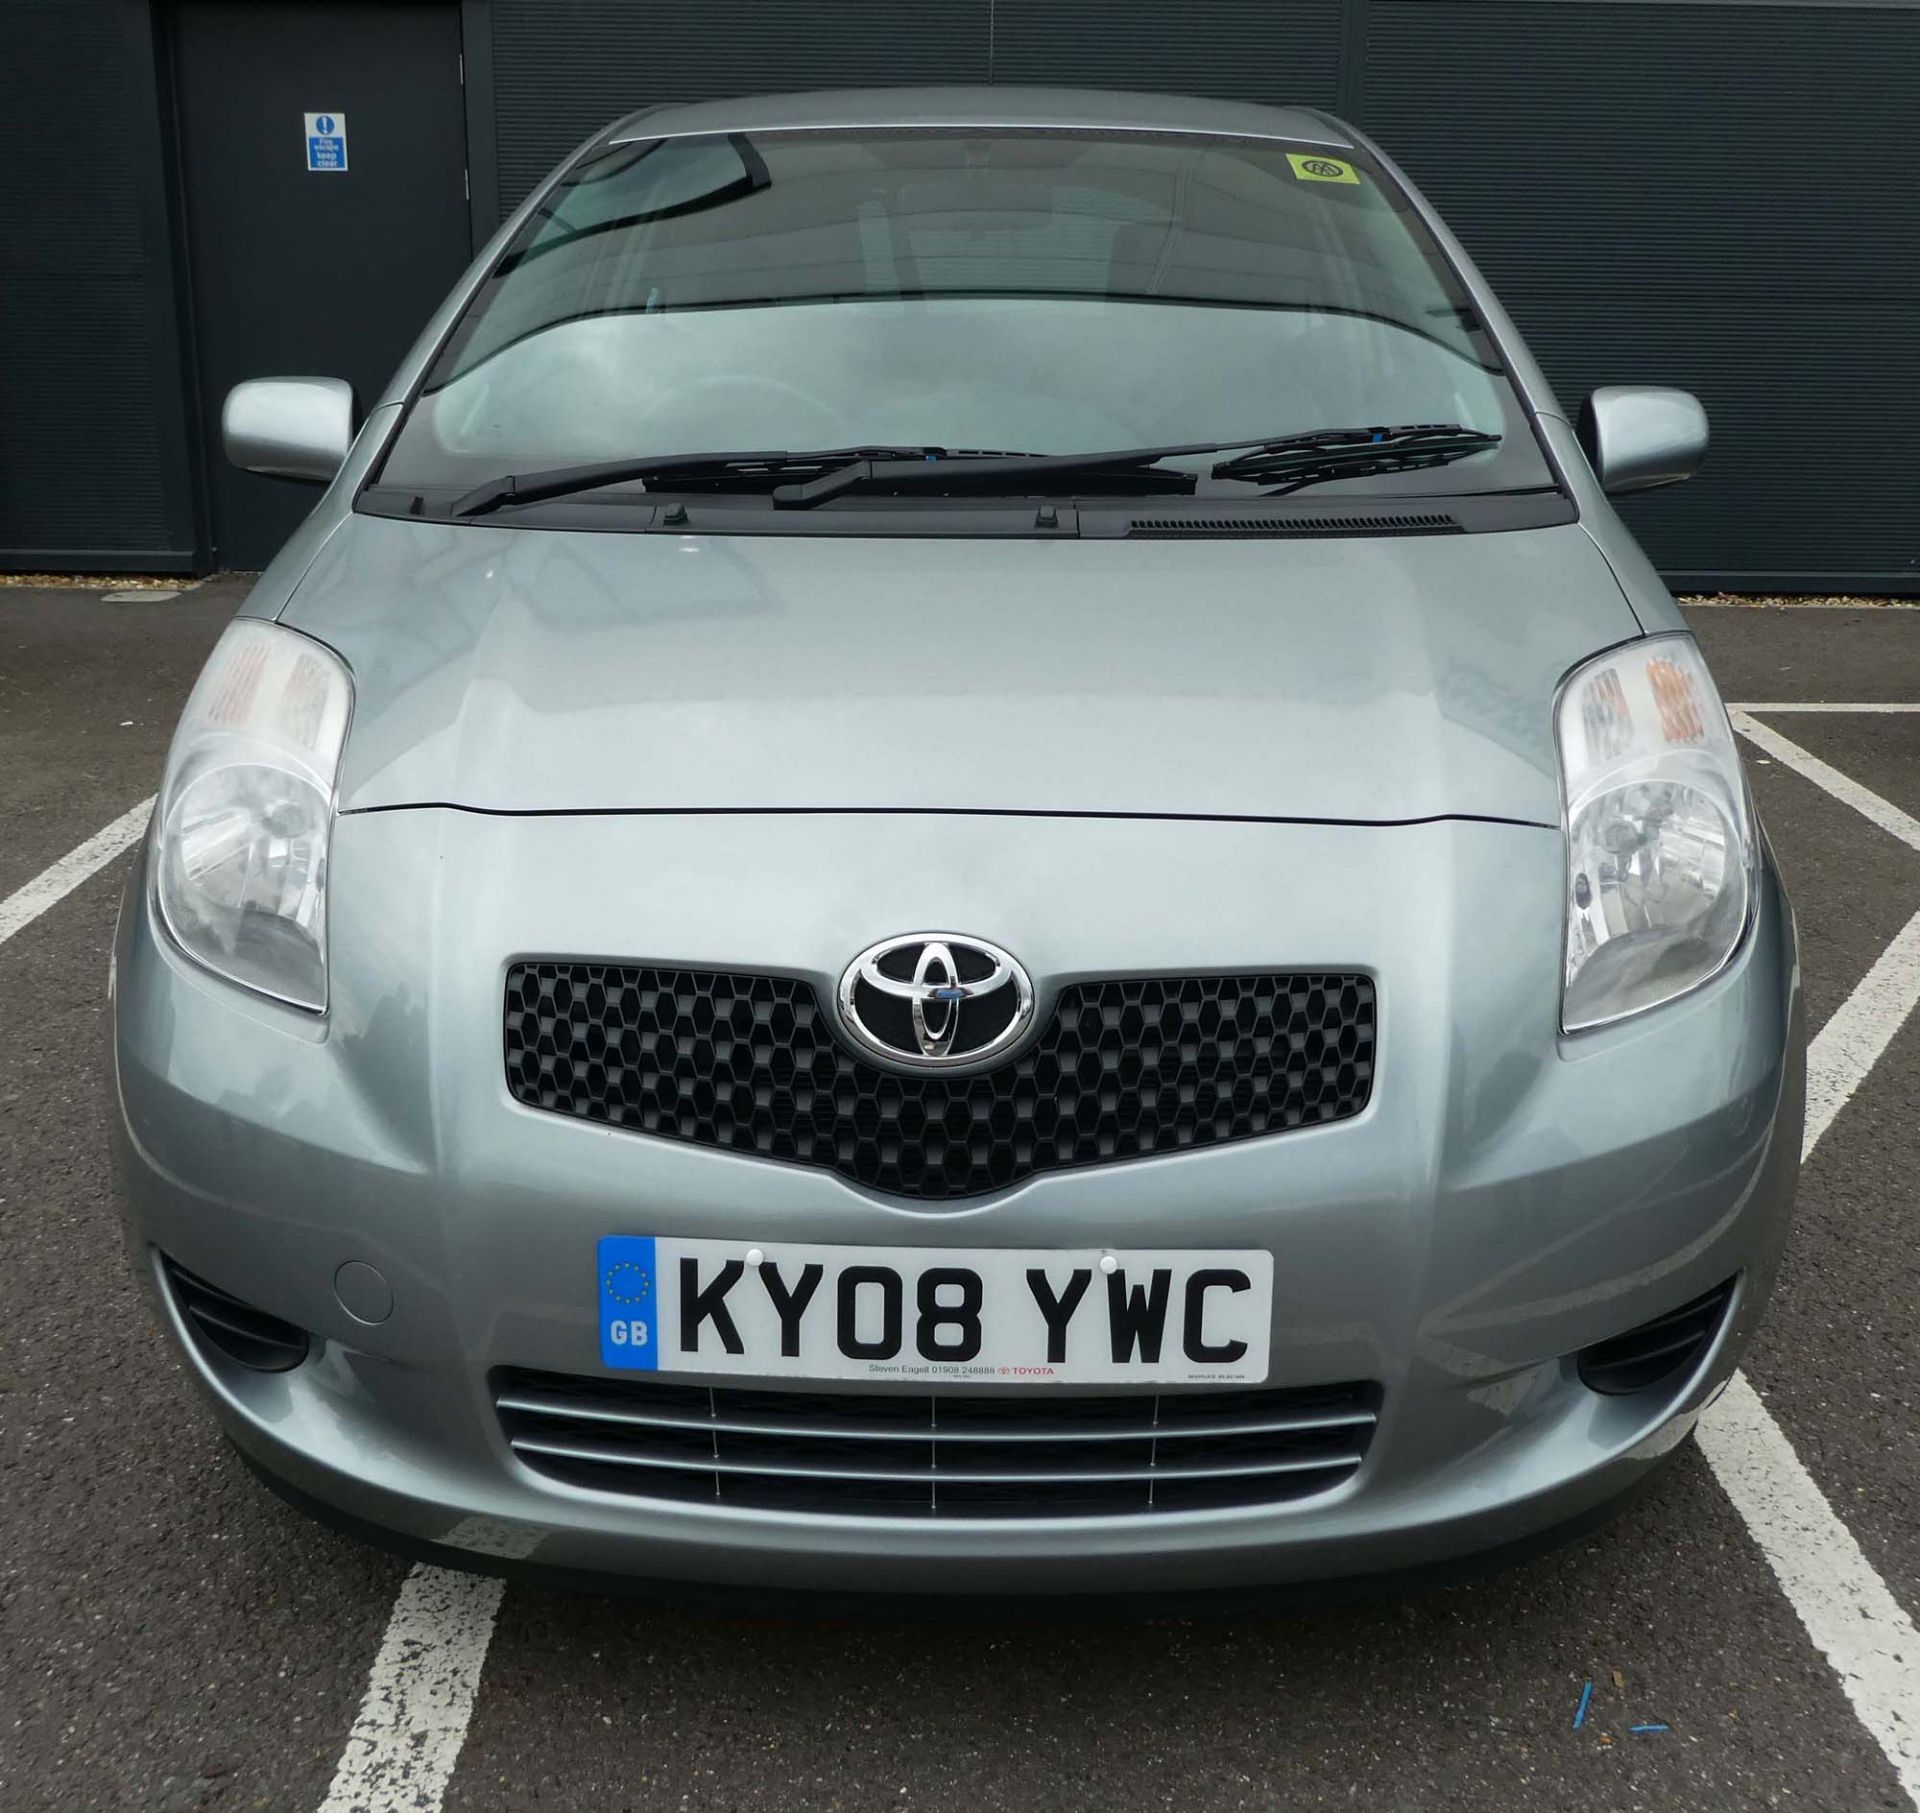 KY08 YWC Toyota Yaris TR in silver, first registered 05.03.2008, one key, 1296cc, petrol, 3 door - Image 7 of 8